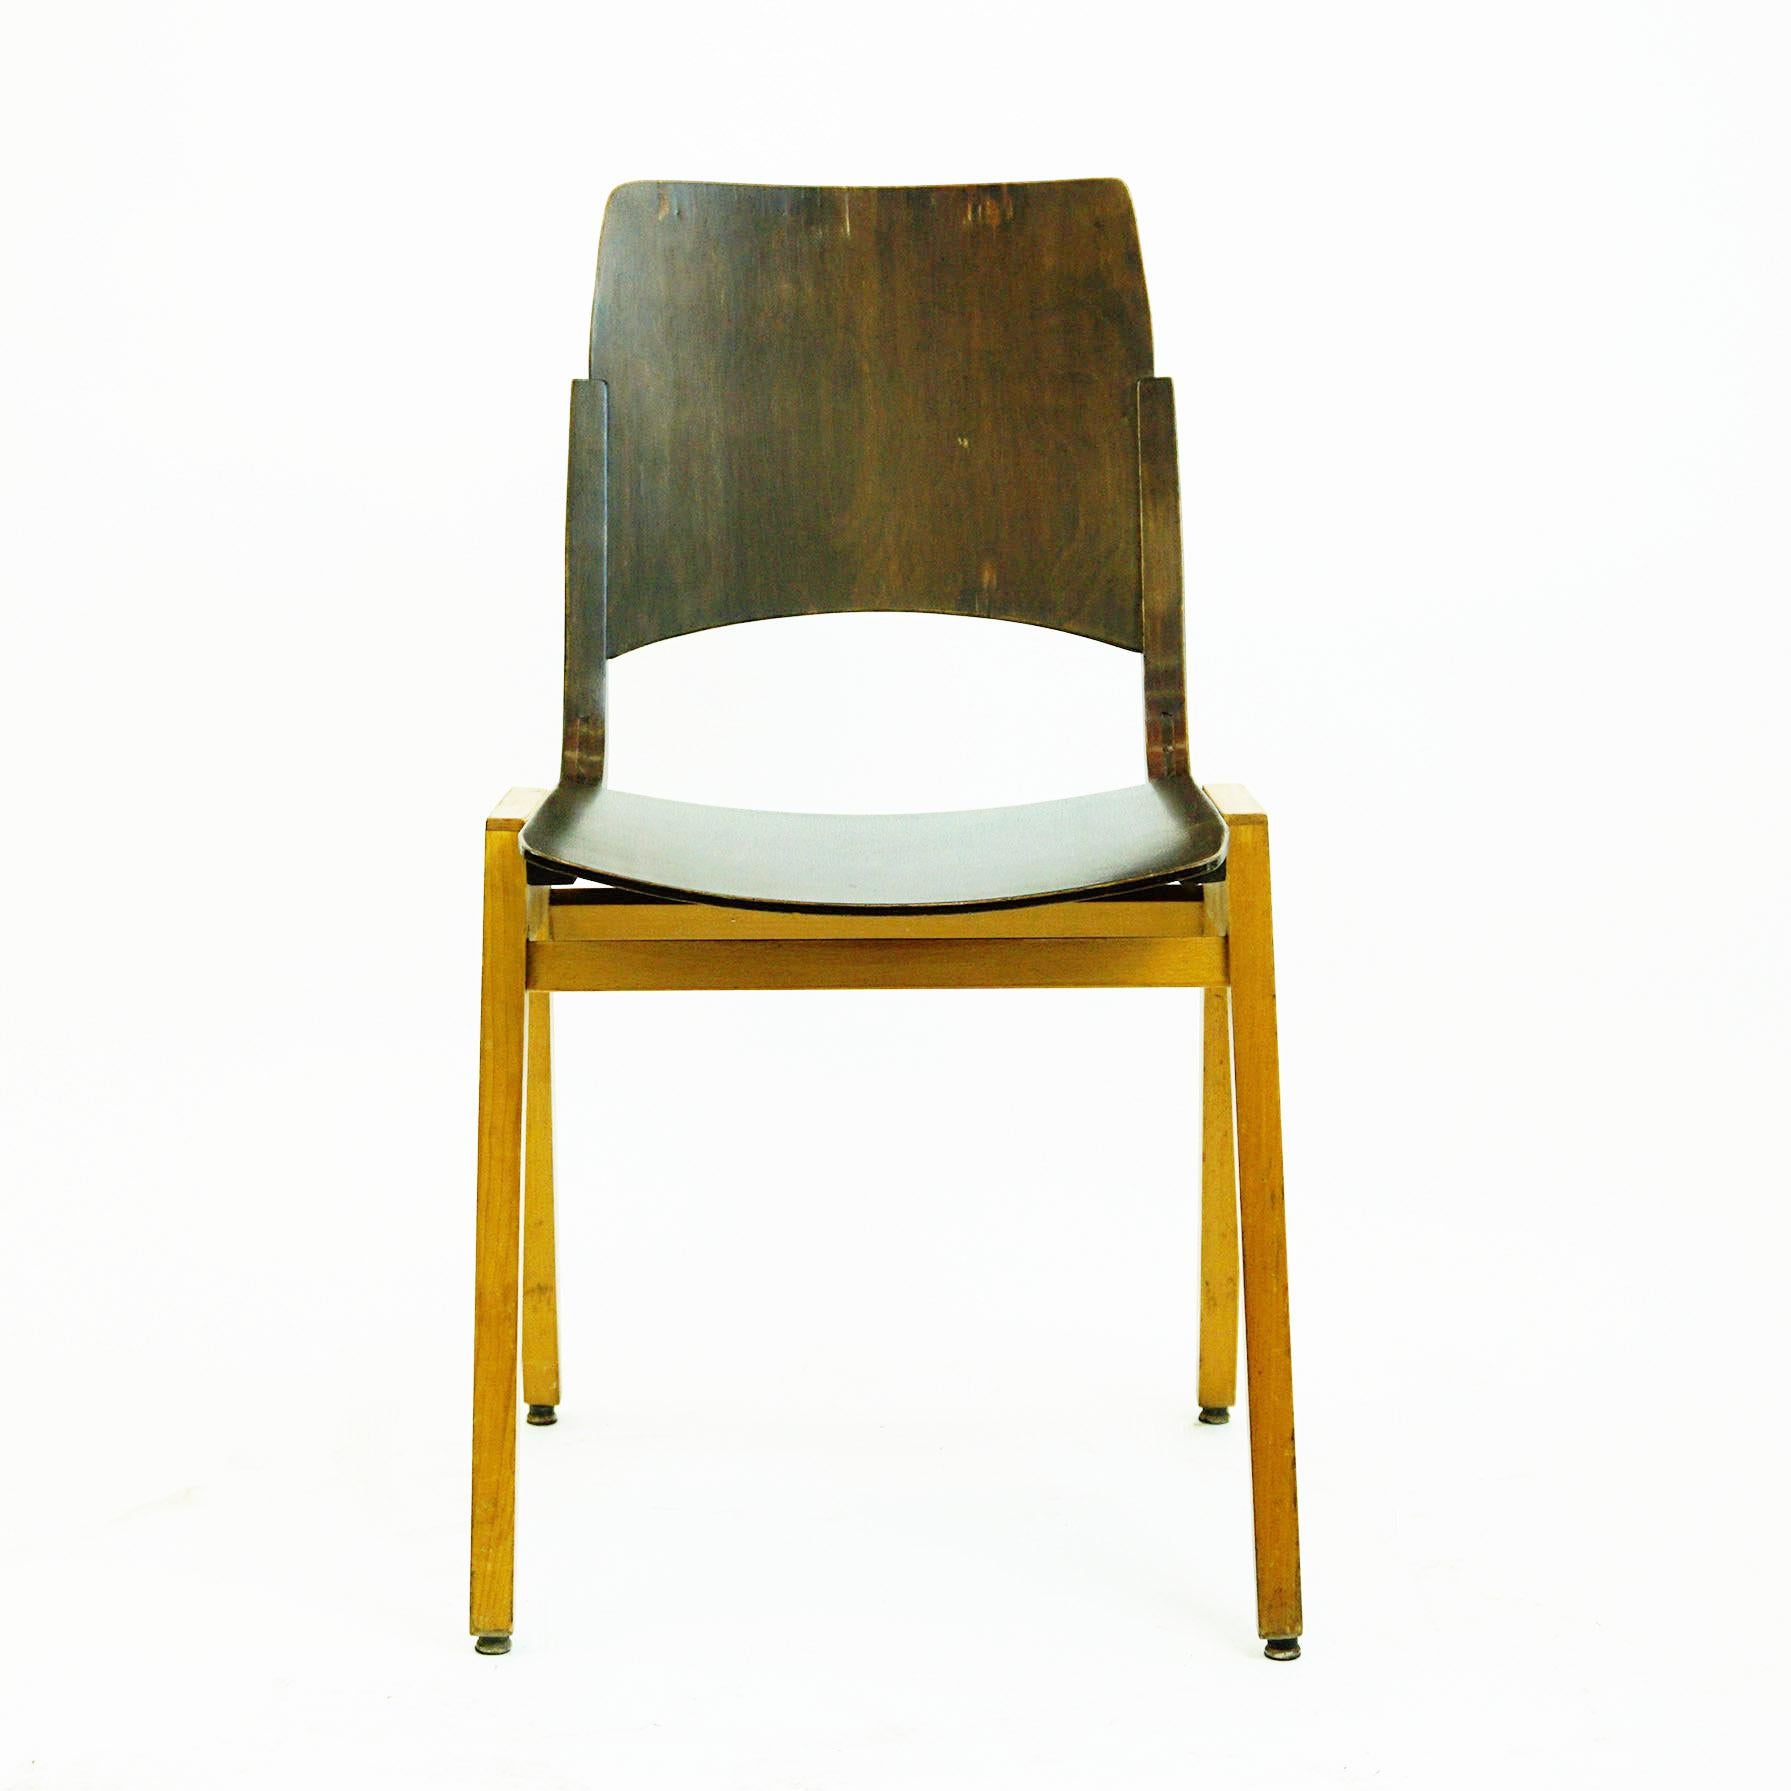 Austrian midcentury beechwood stacking chair designed by Roland Rainer in 1952, same time as the famous model called Stadthallenstuhl. The model P7 has been also used at the Vienna Stadthalle, mostly in the backstage areas. One of the most important